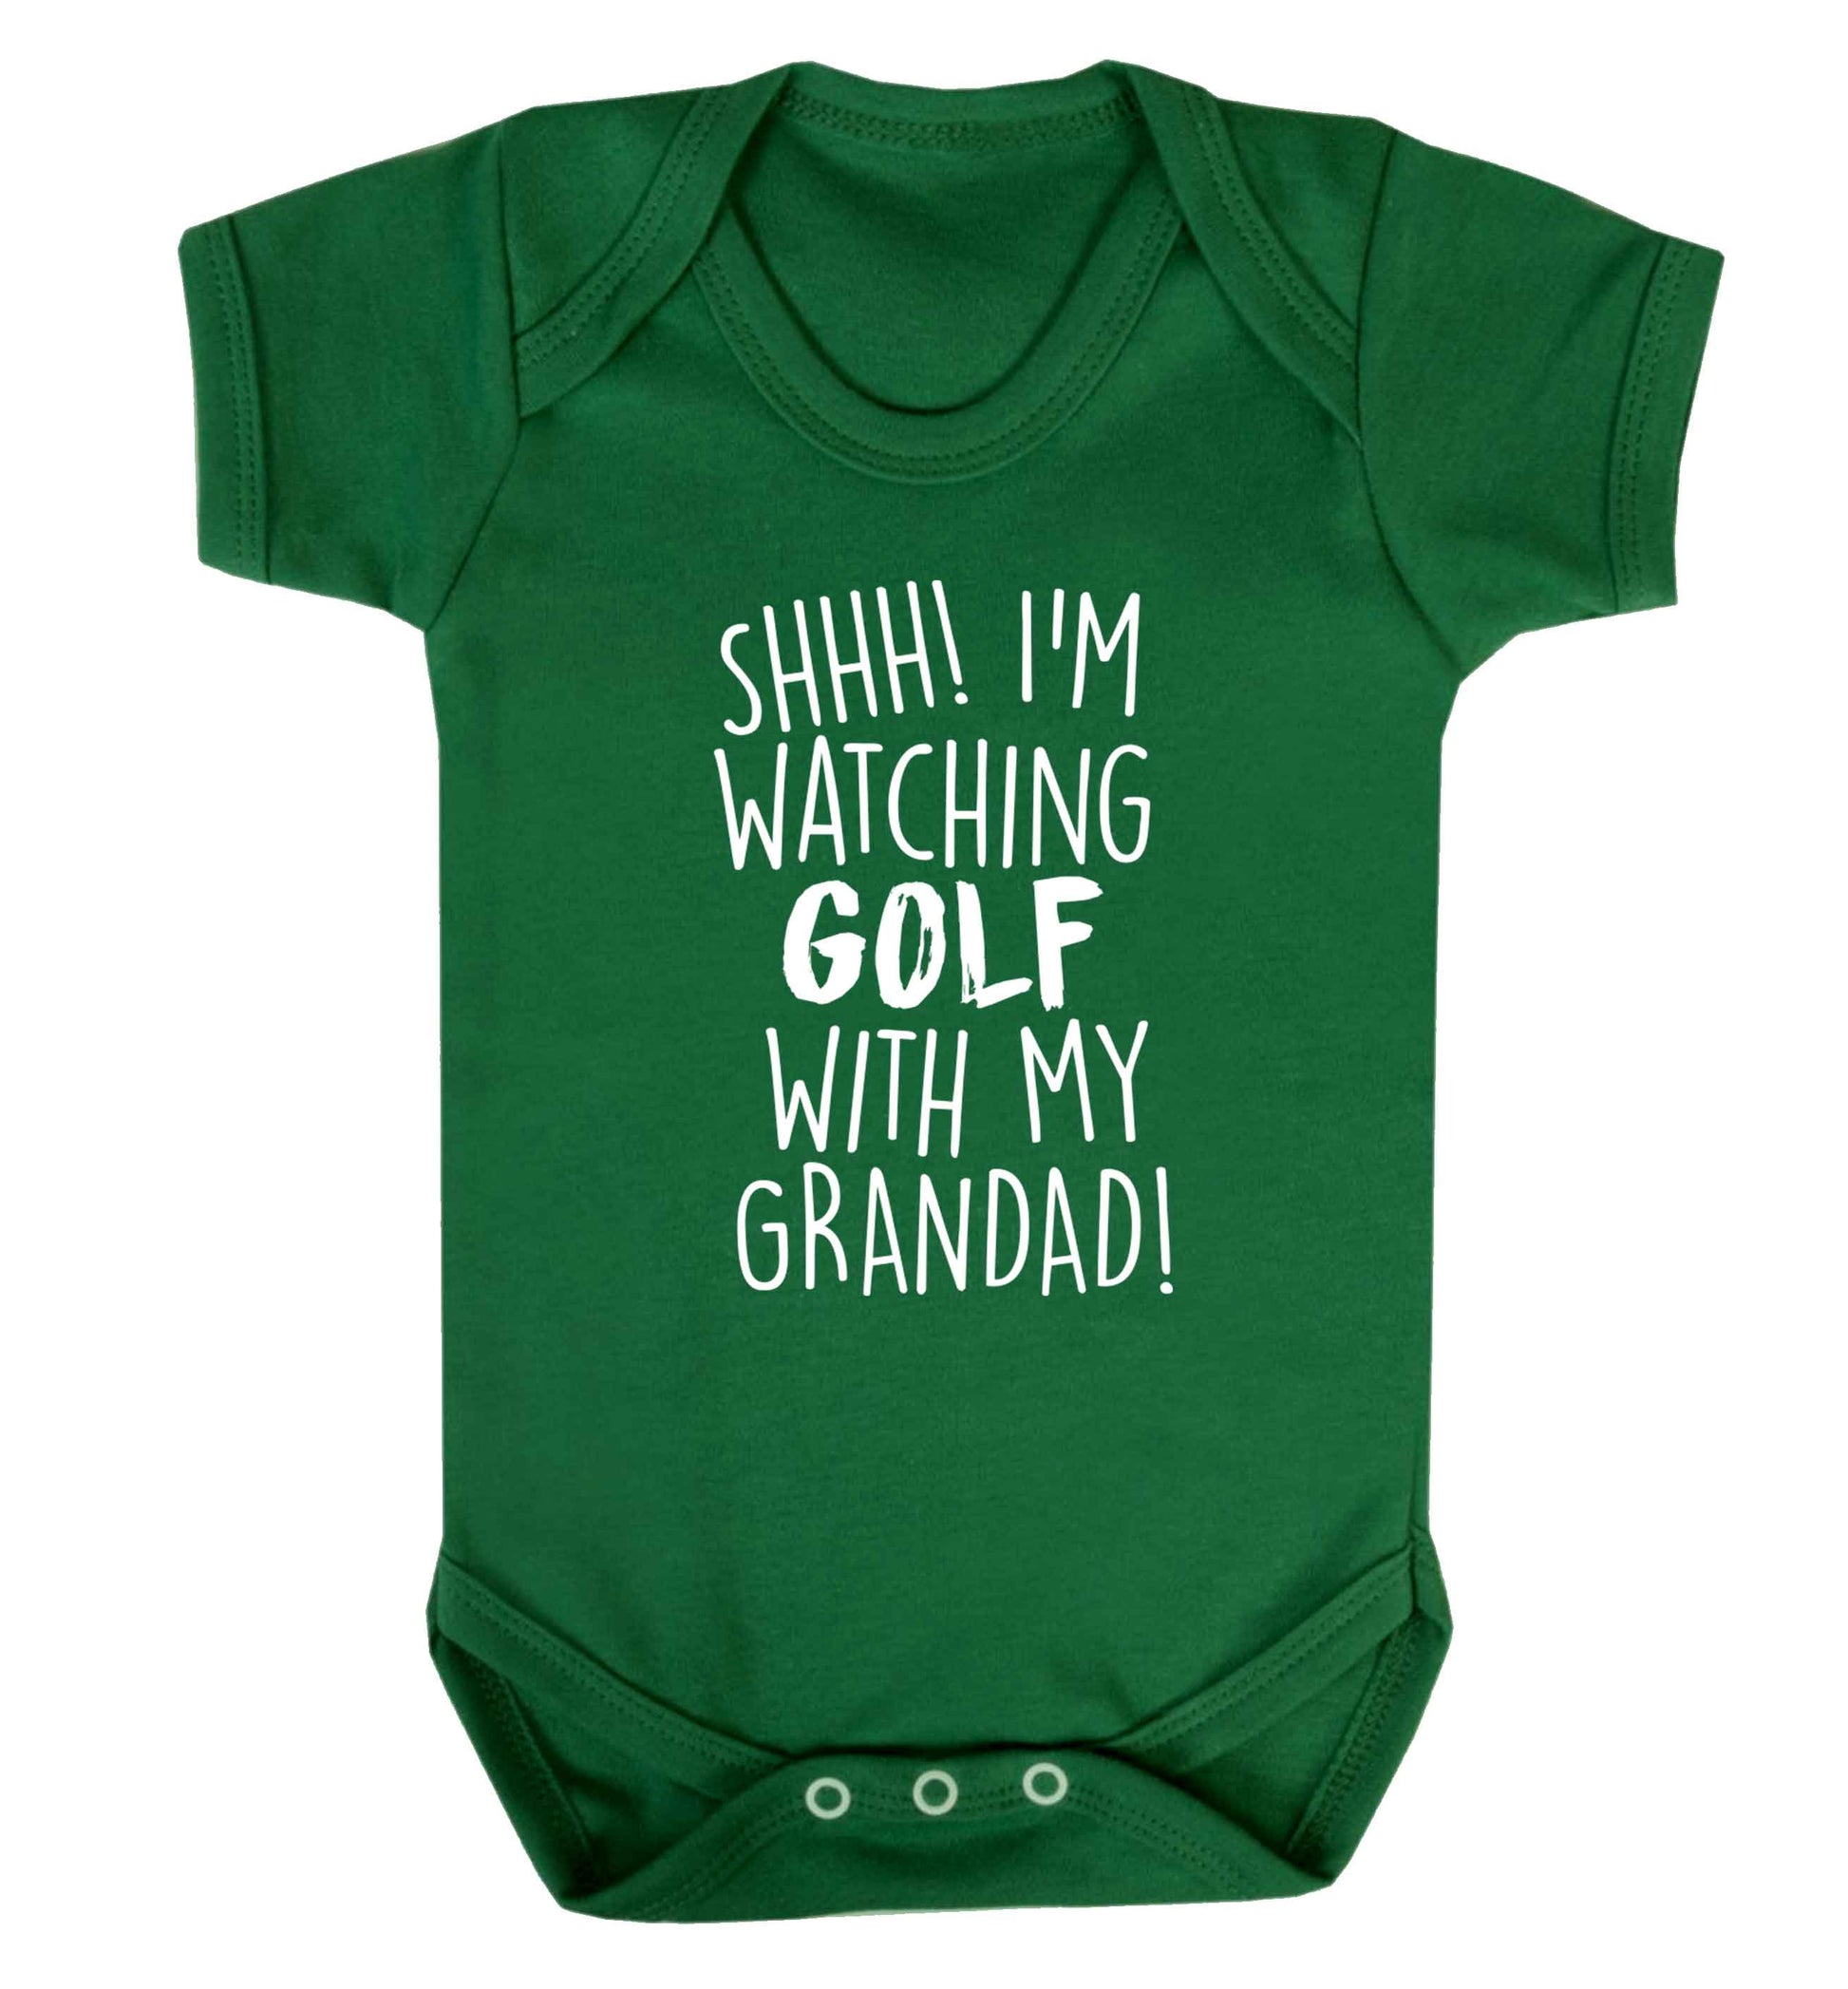 Shh I'm watching golf with my grandad Baby Vest green 18-24 months